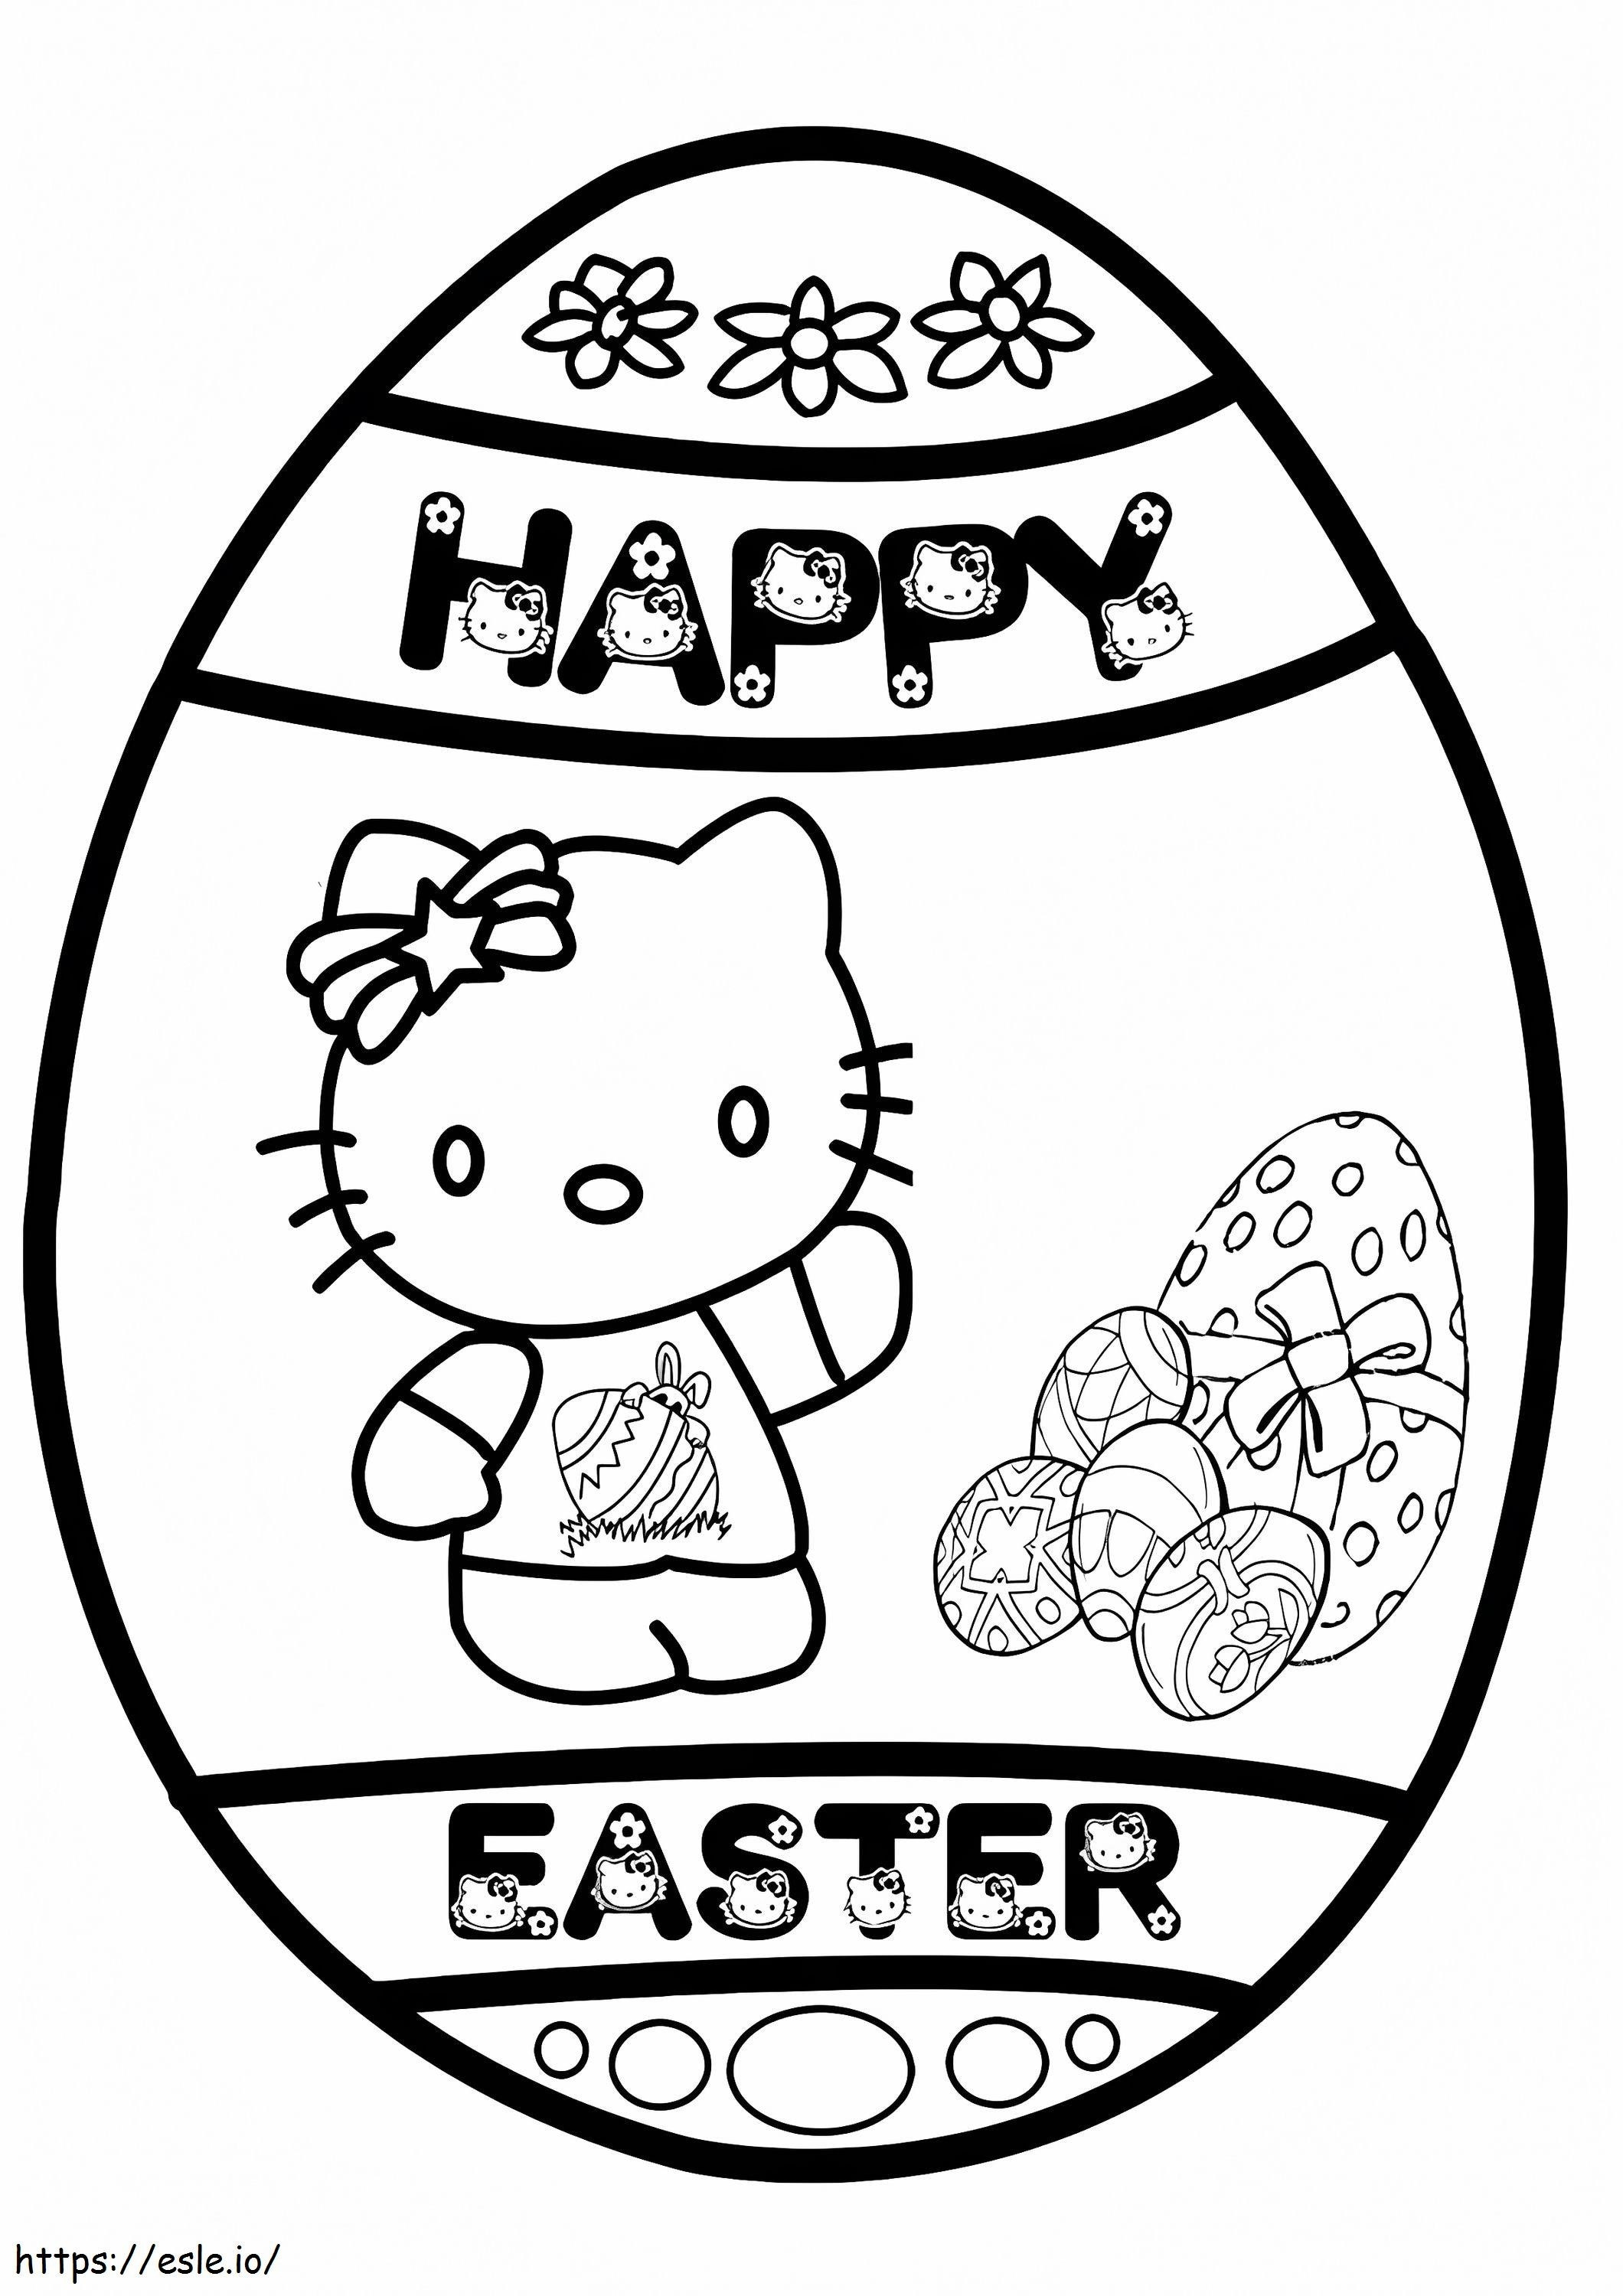 1526202684 The Hello Kitty A4 coloring page